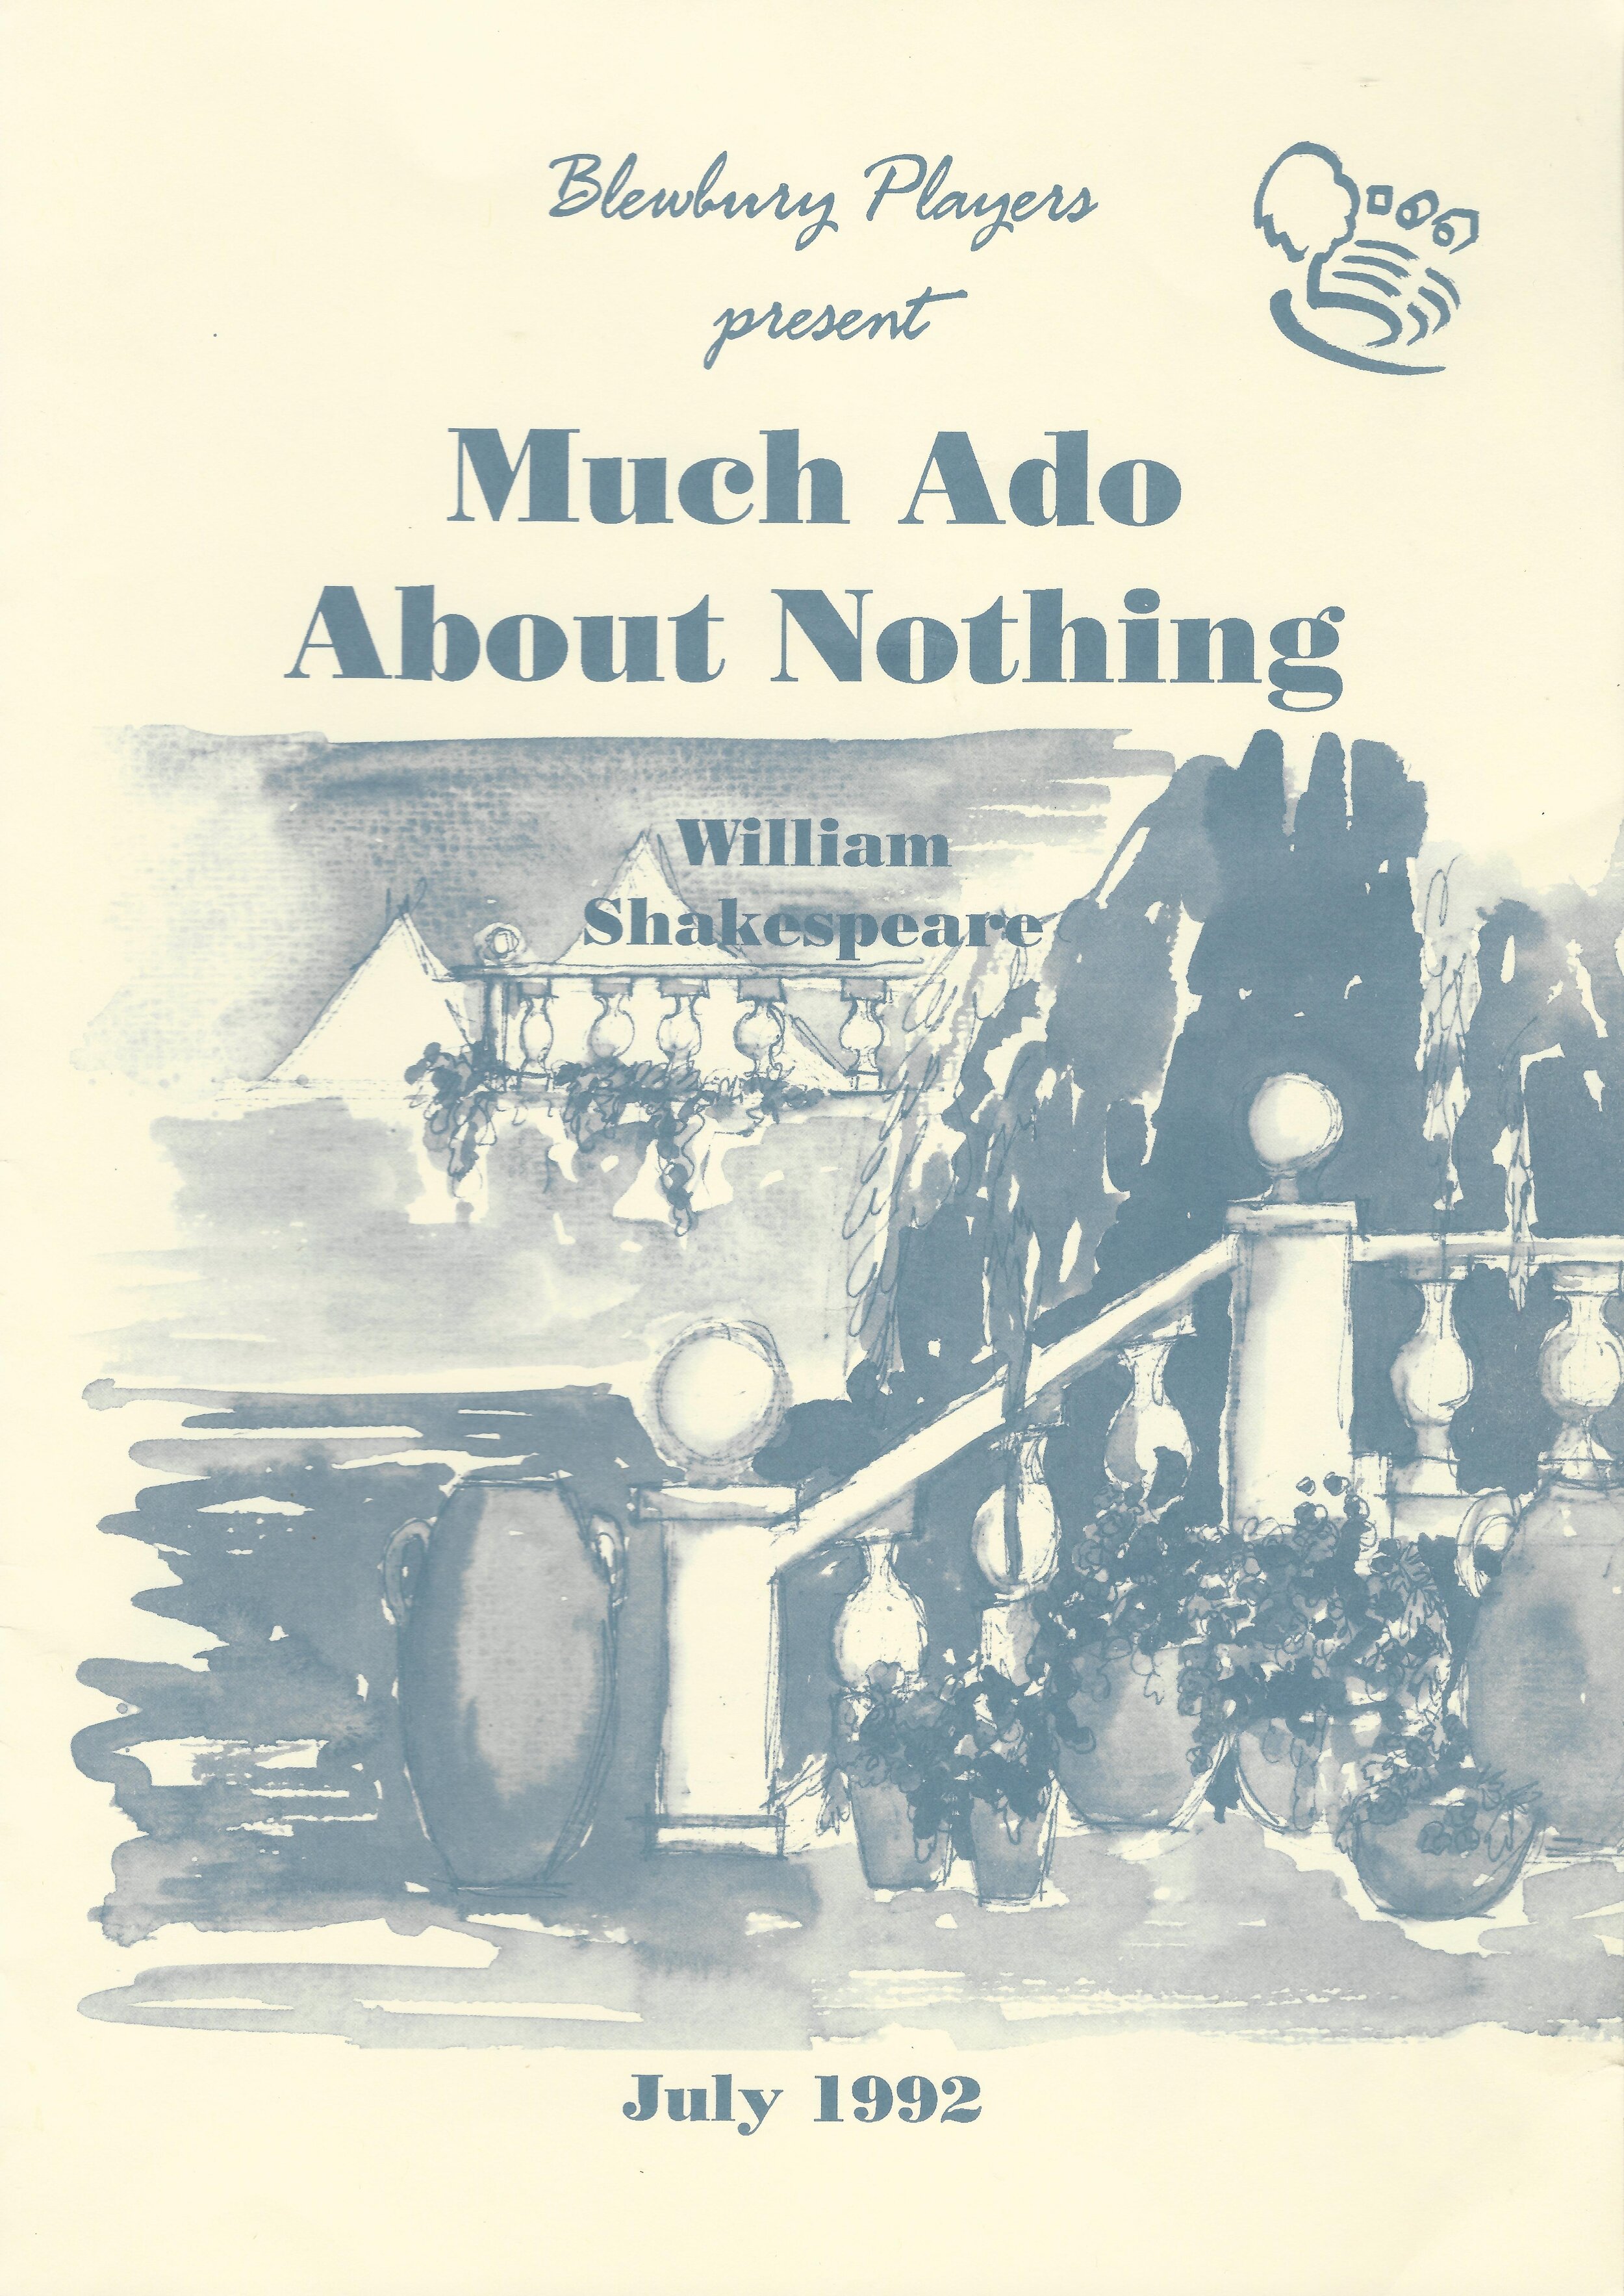 1992 Much Ado About Nothing.jpg